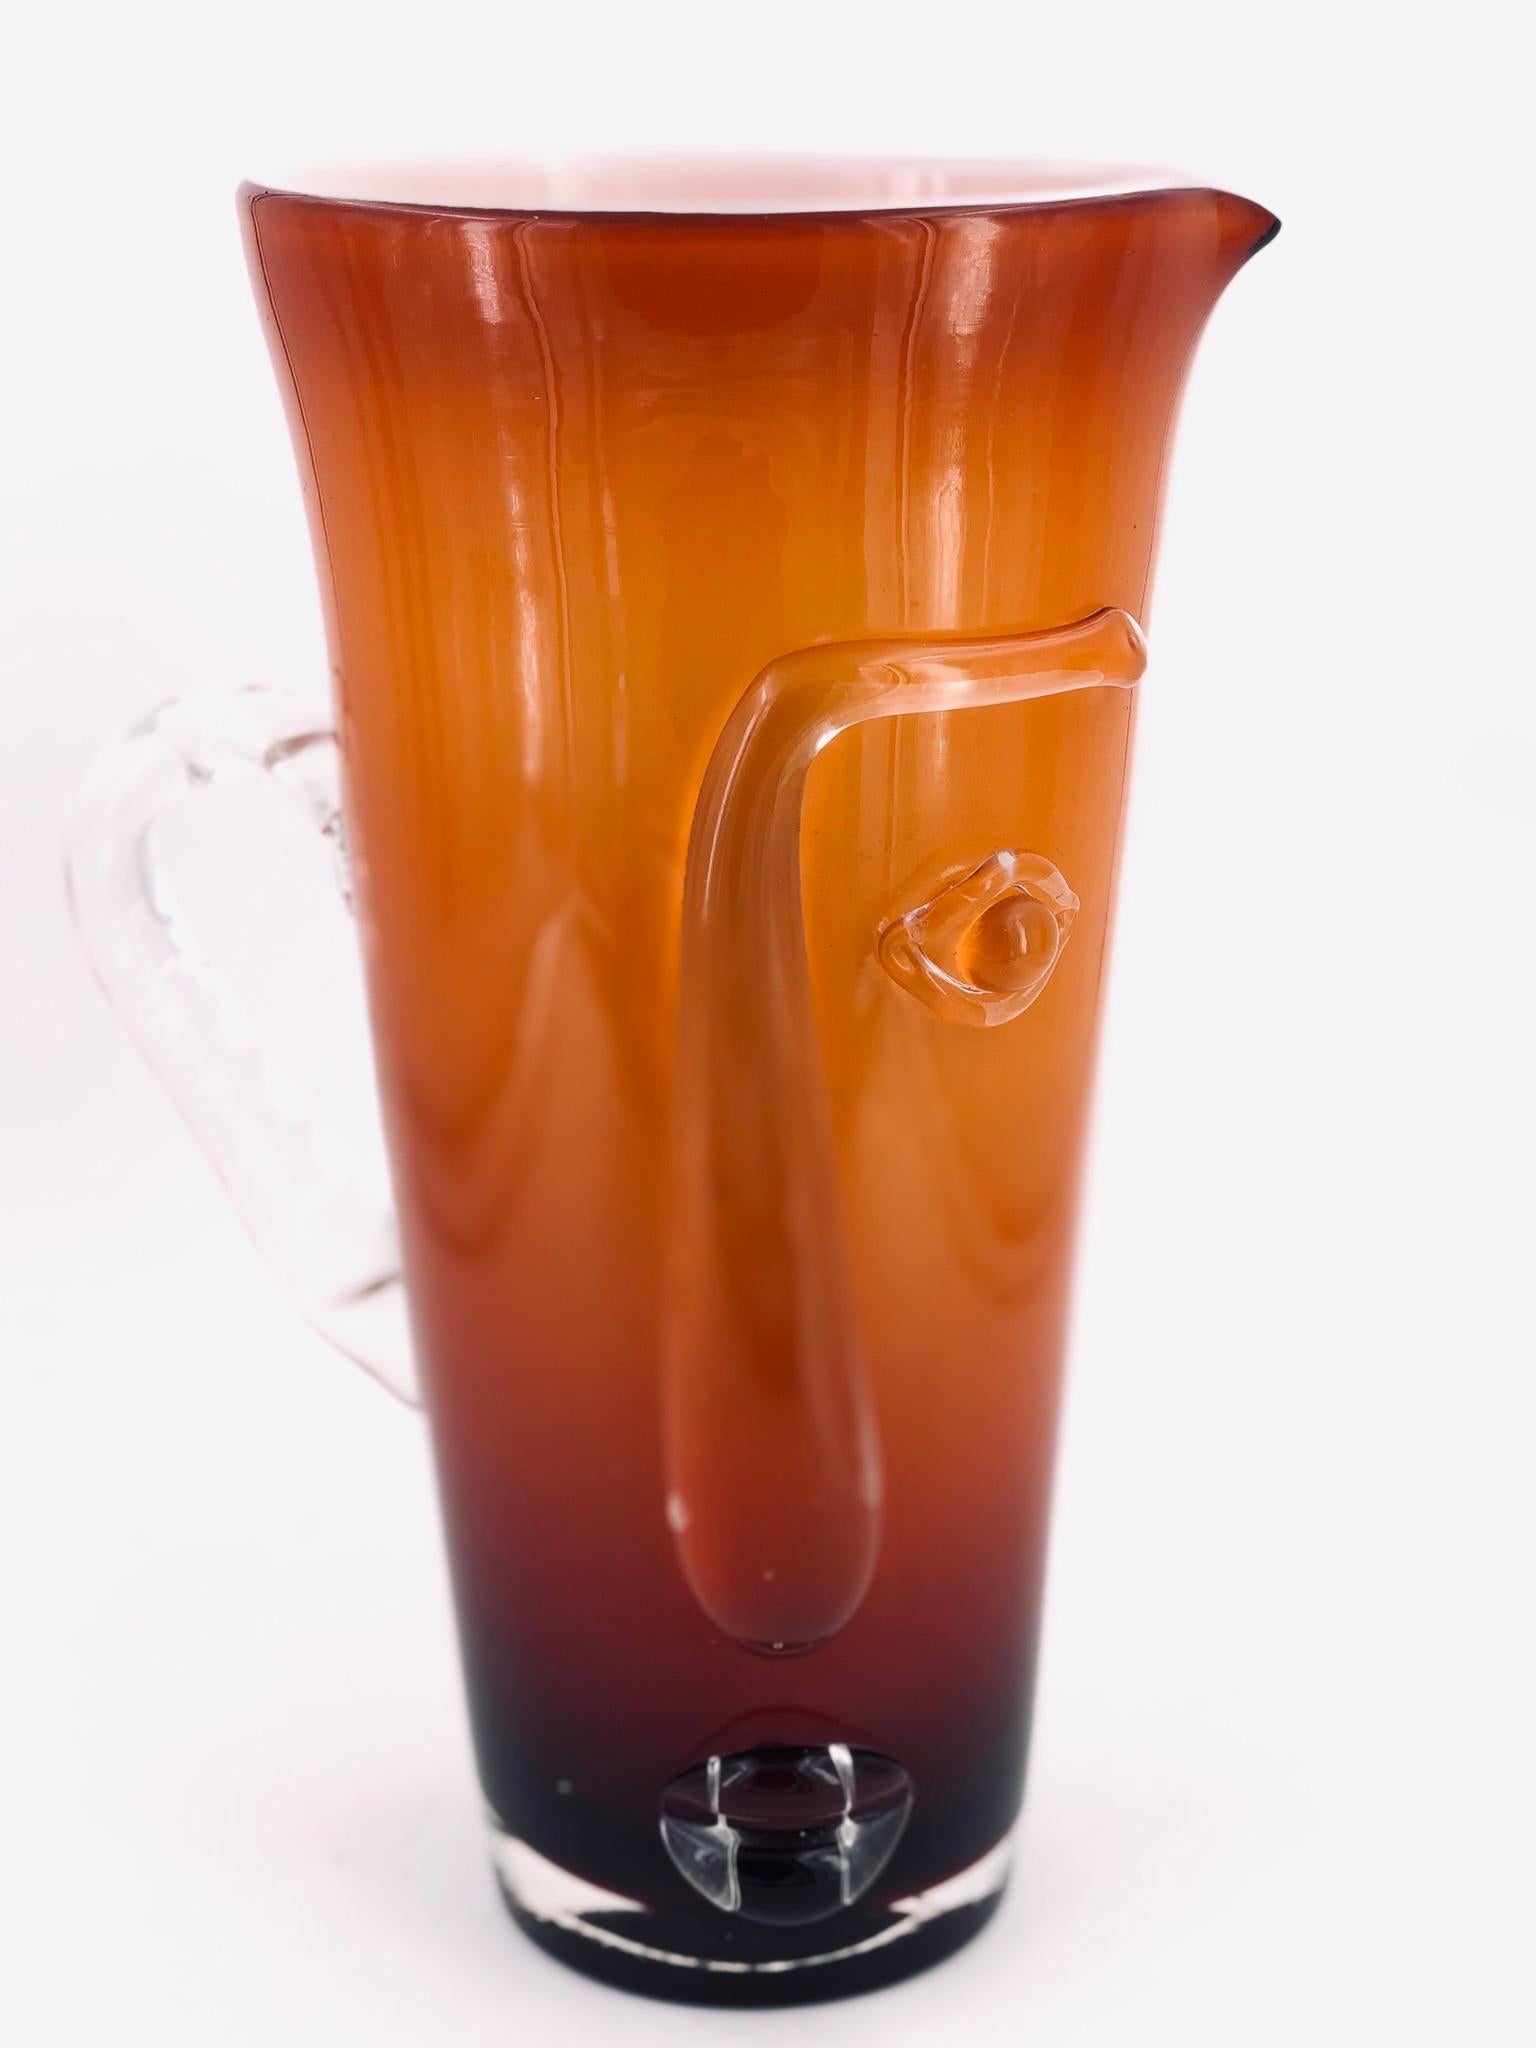 A beautiful and rare tall glass, a pitcher in a Picasso style cubist face the handle it's in a clear glass shaped like an ear, circa 1980s. Unsigned in great condition no chips or cracks. With the pontile mark on the bottom.